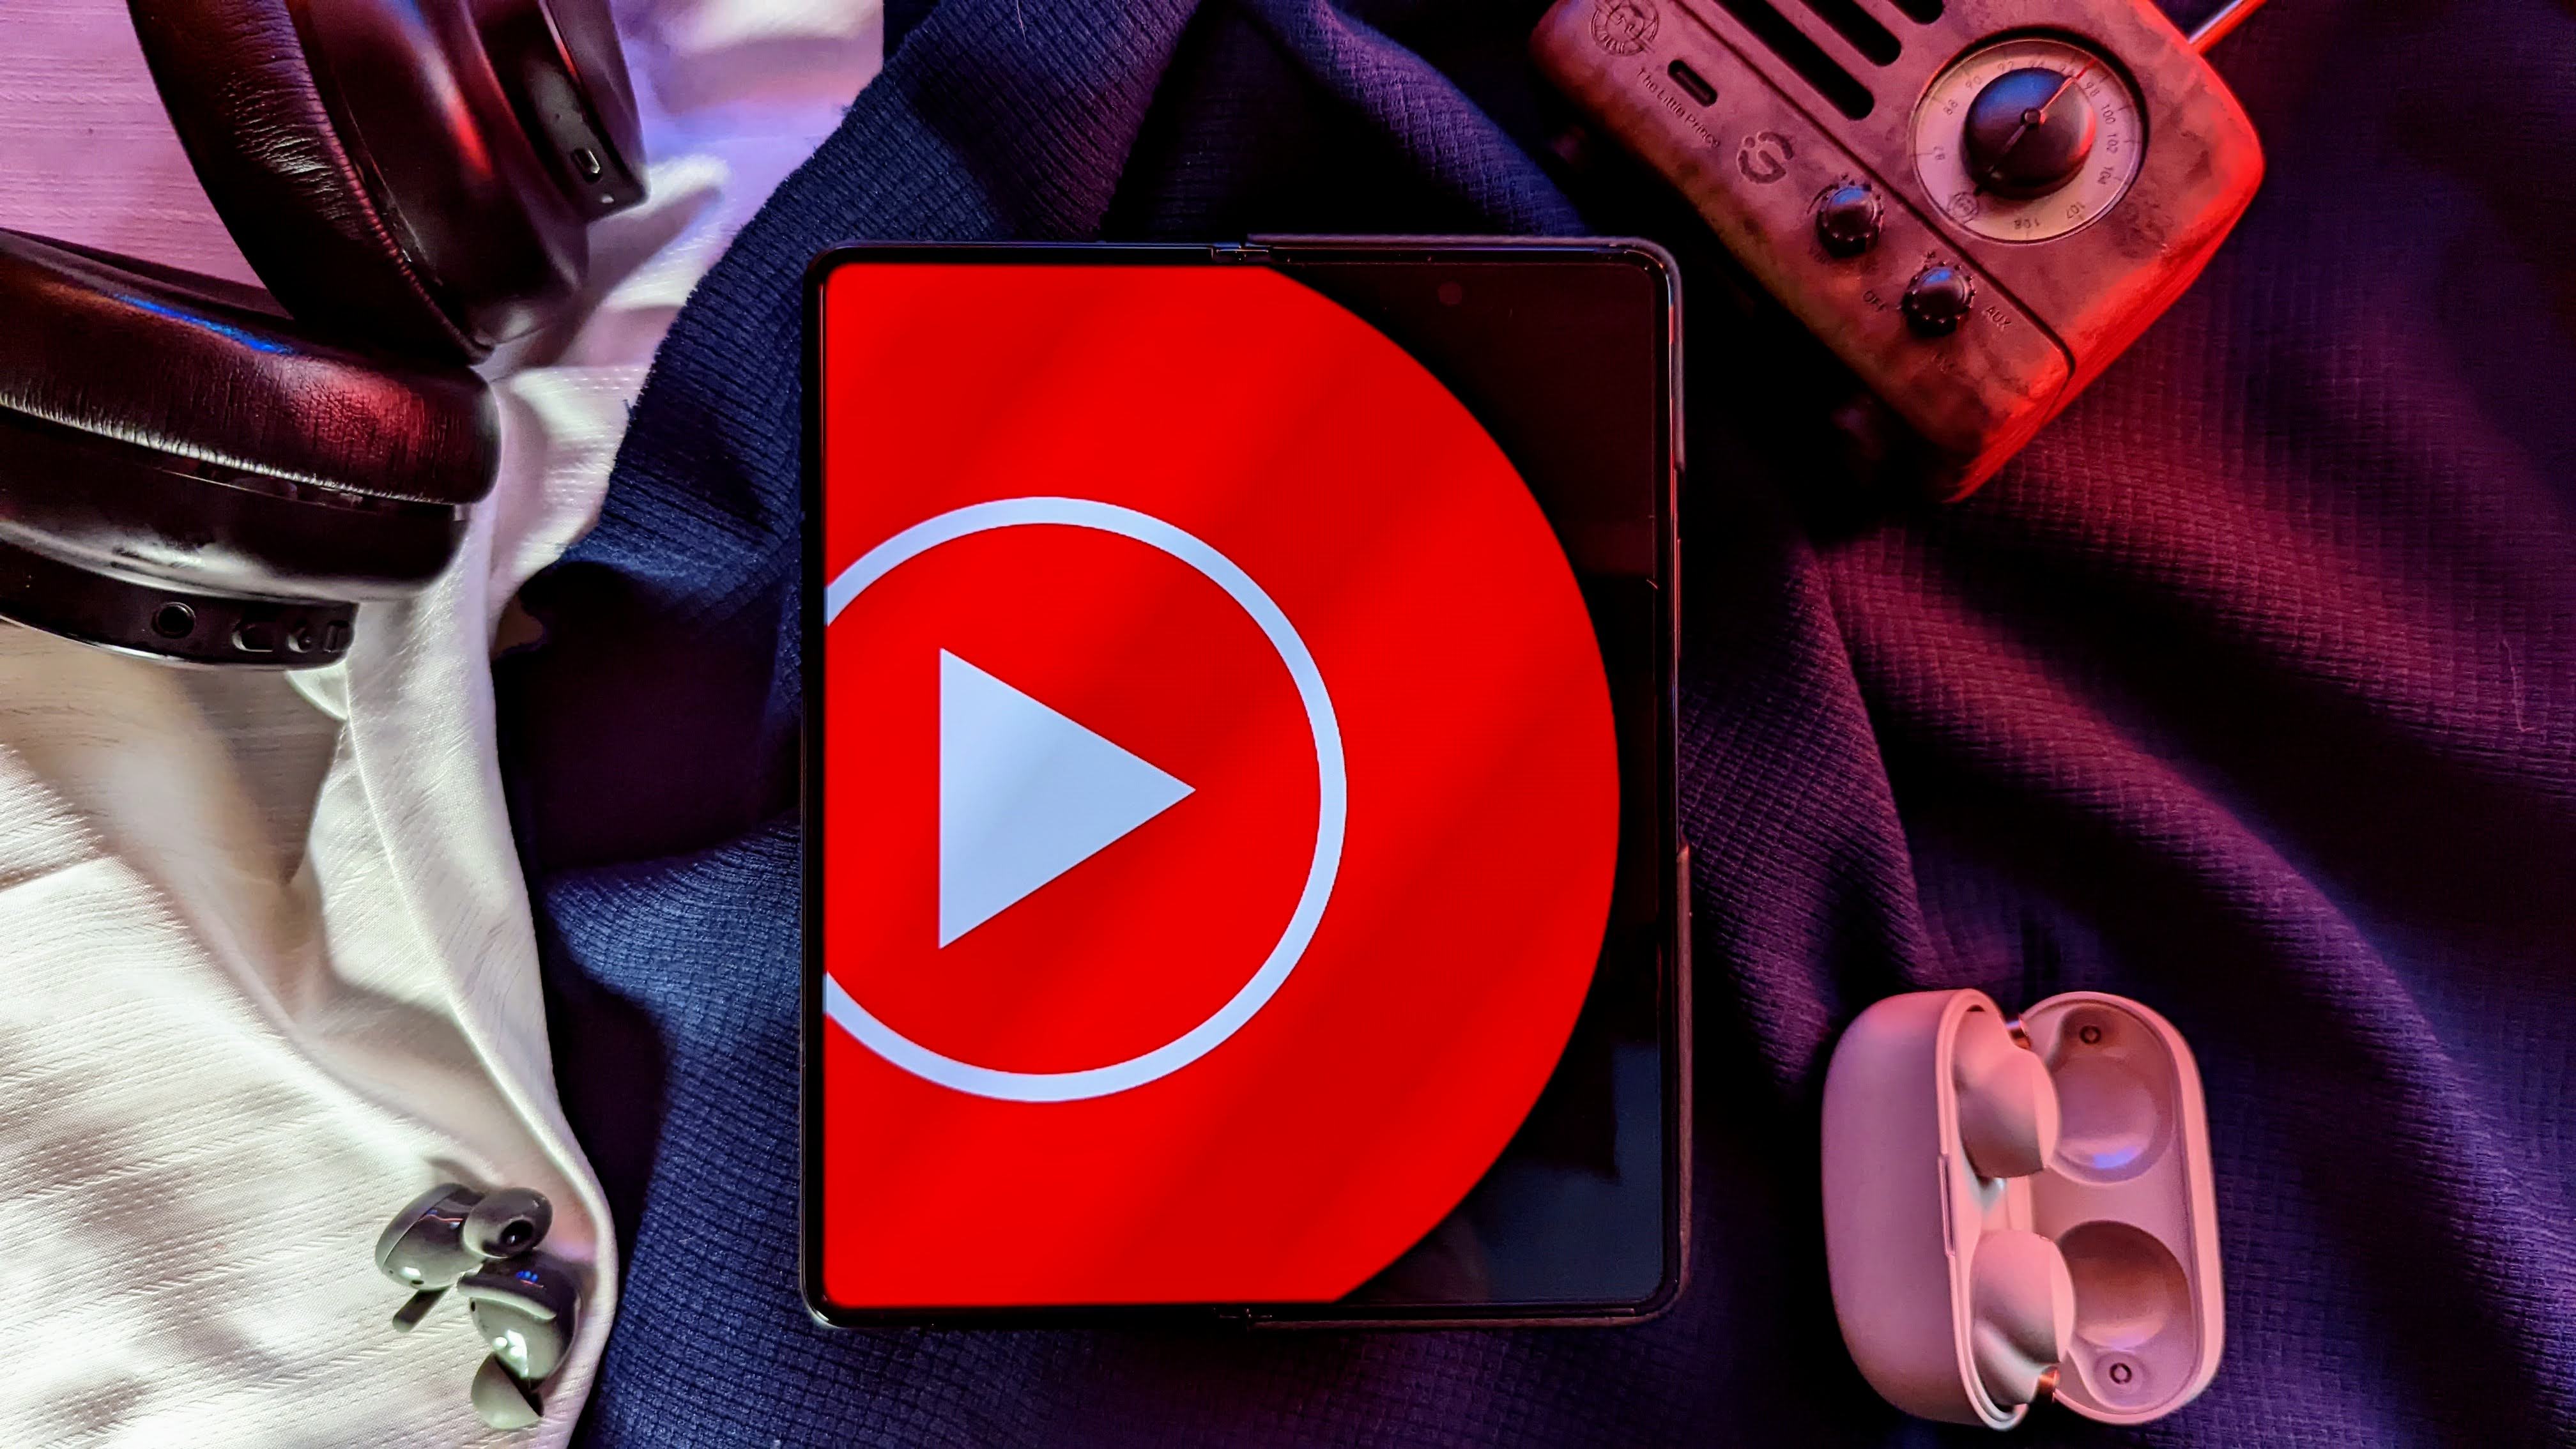 YouTube Music wants you to help shape the future of the streaming service